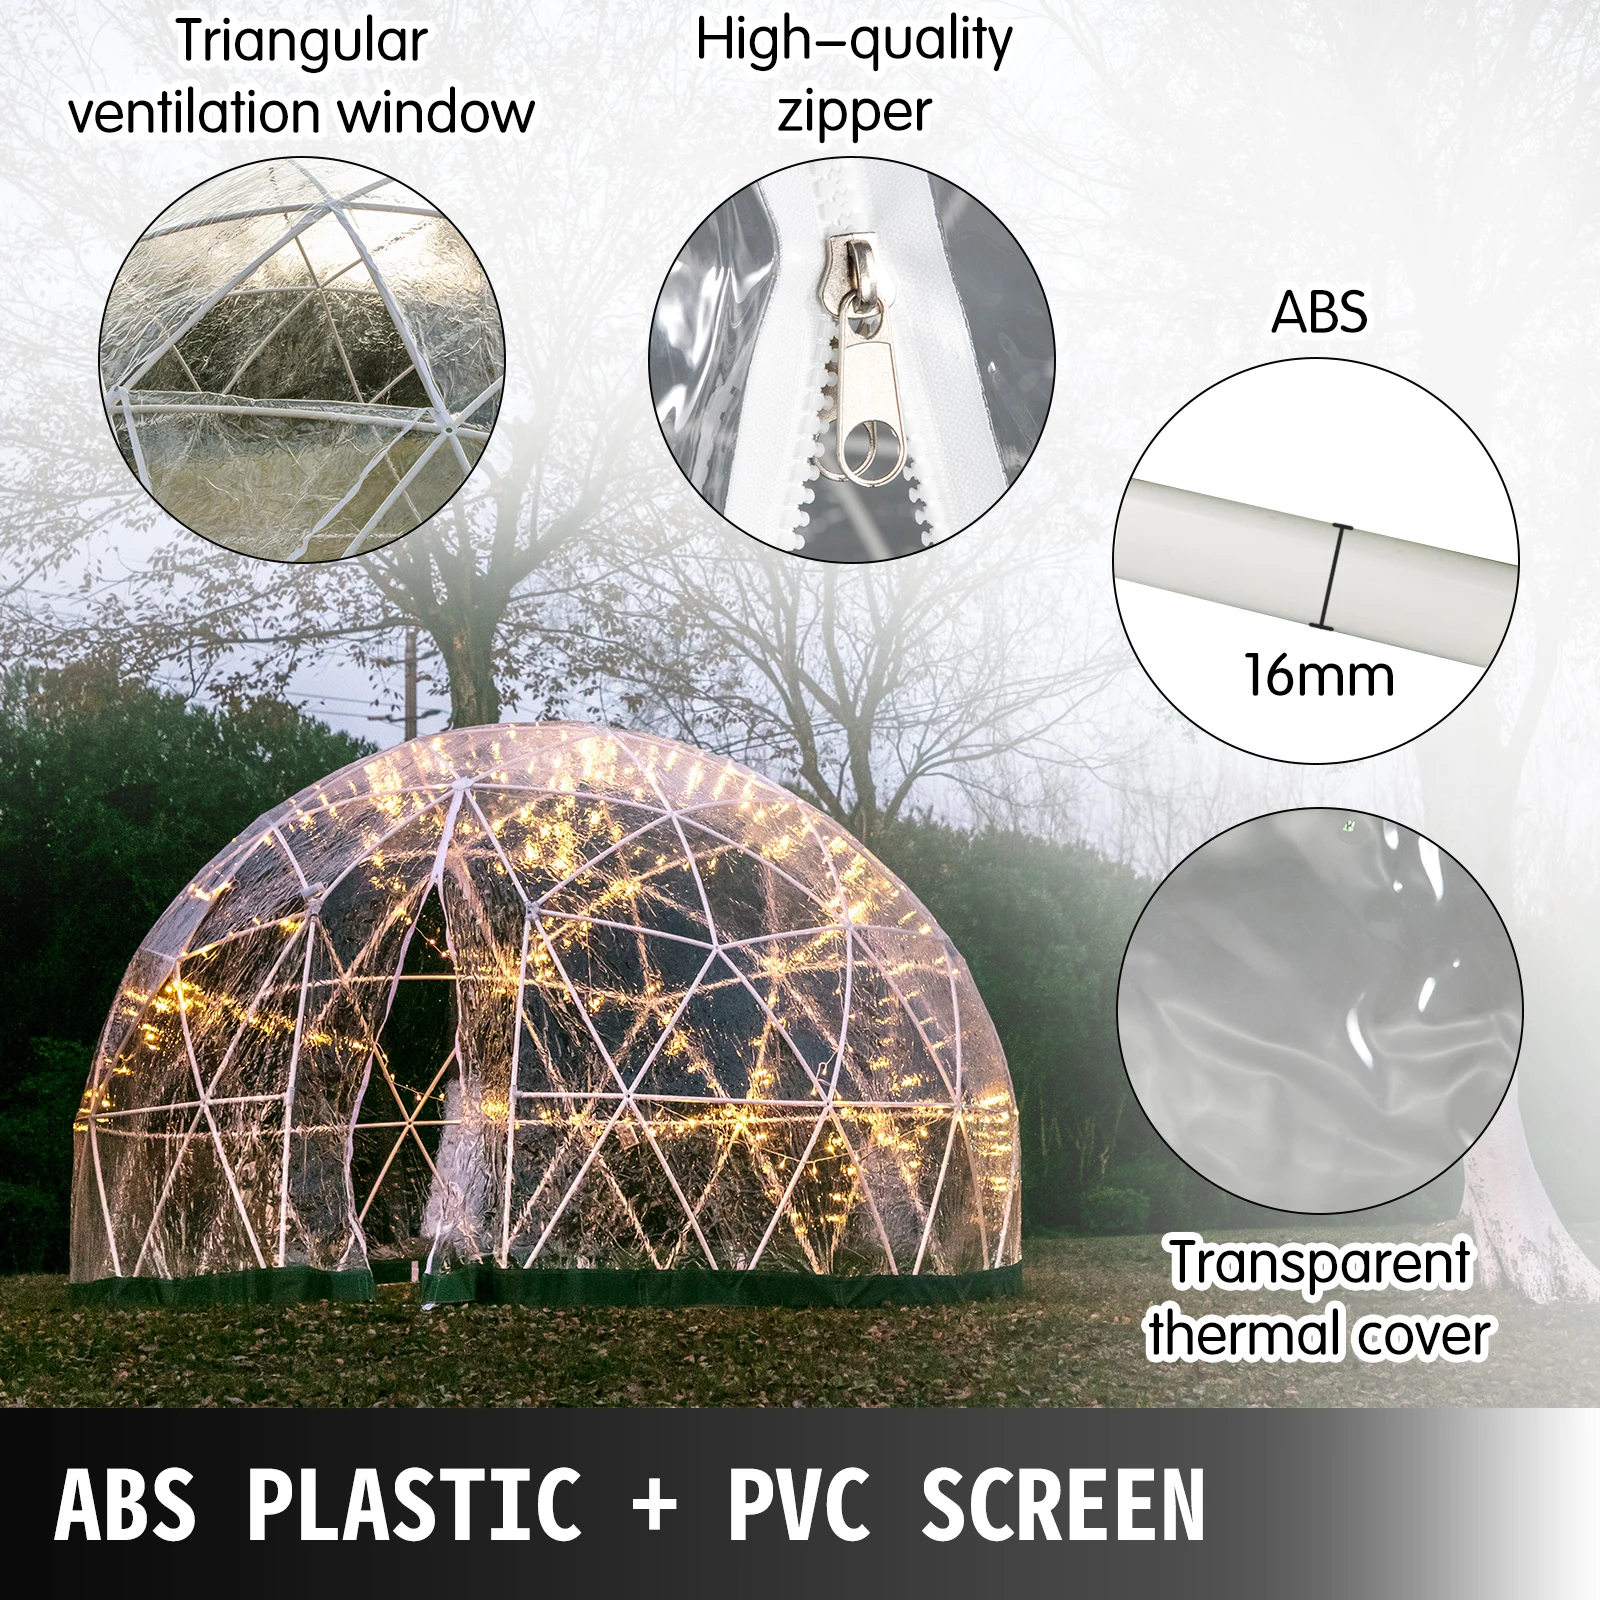 

outdoor glamping waterproof clear big igloo tent dome for home garden geodesic dome tent, Transparent